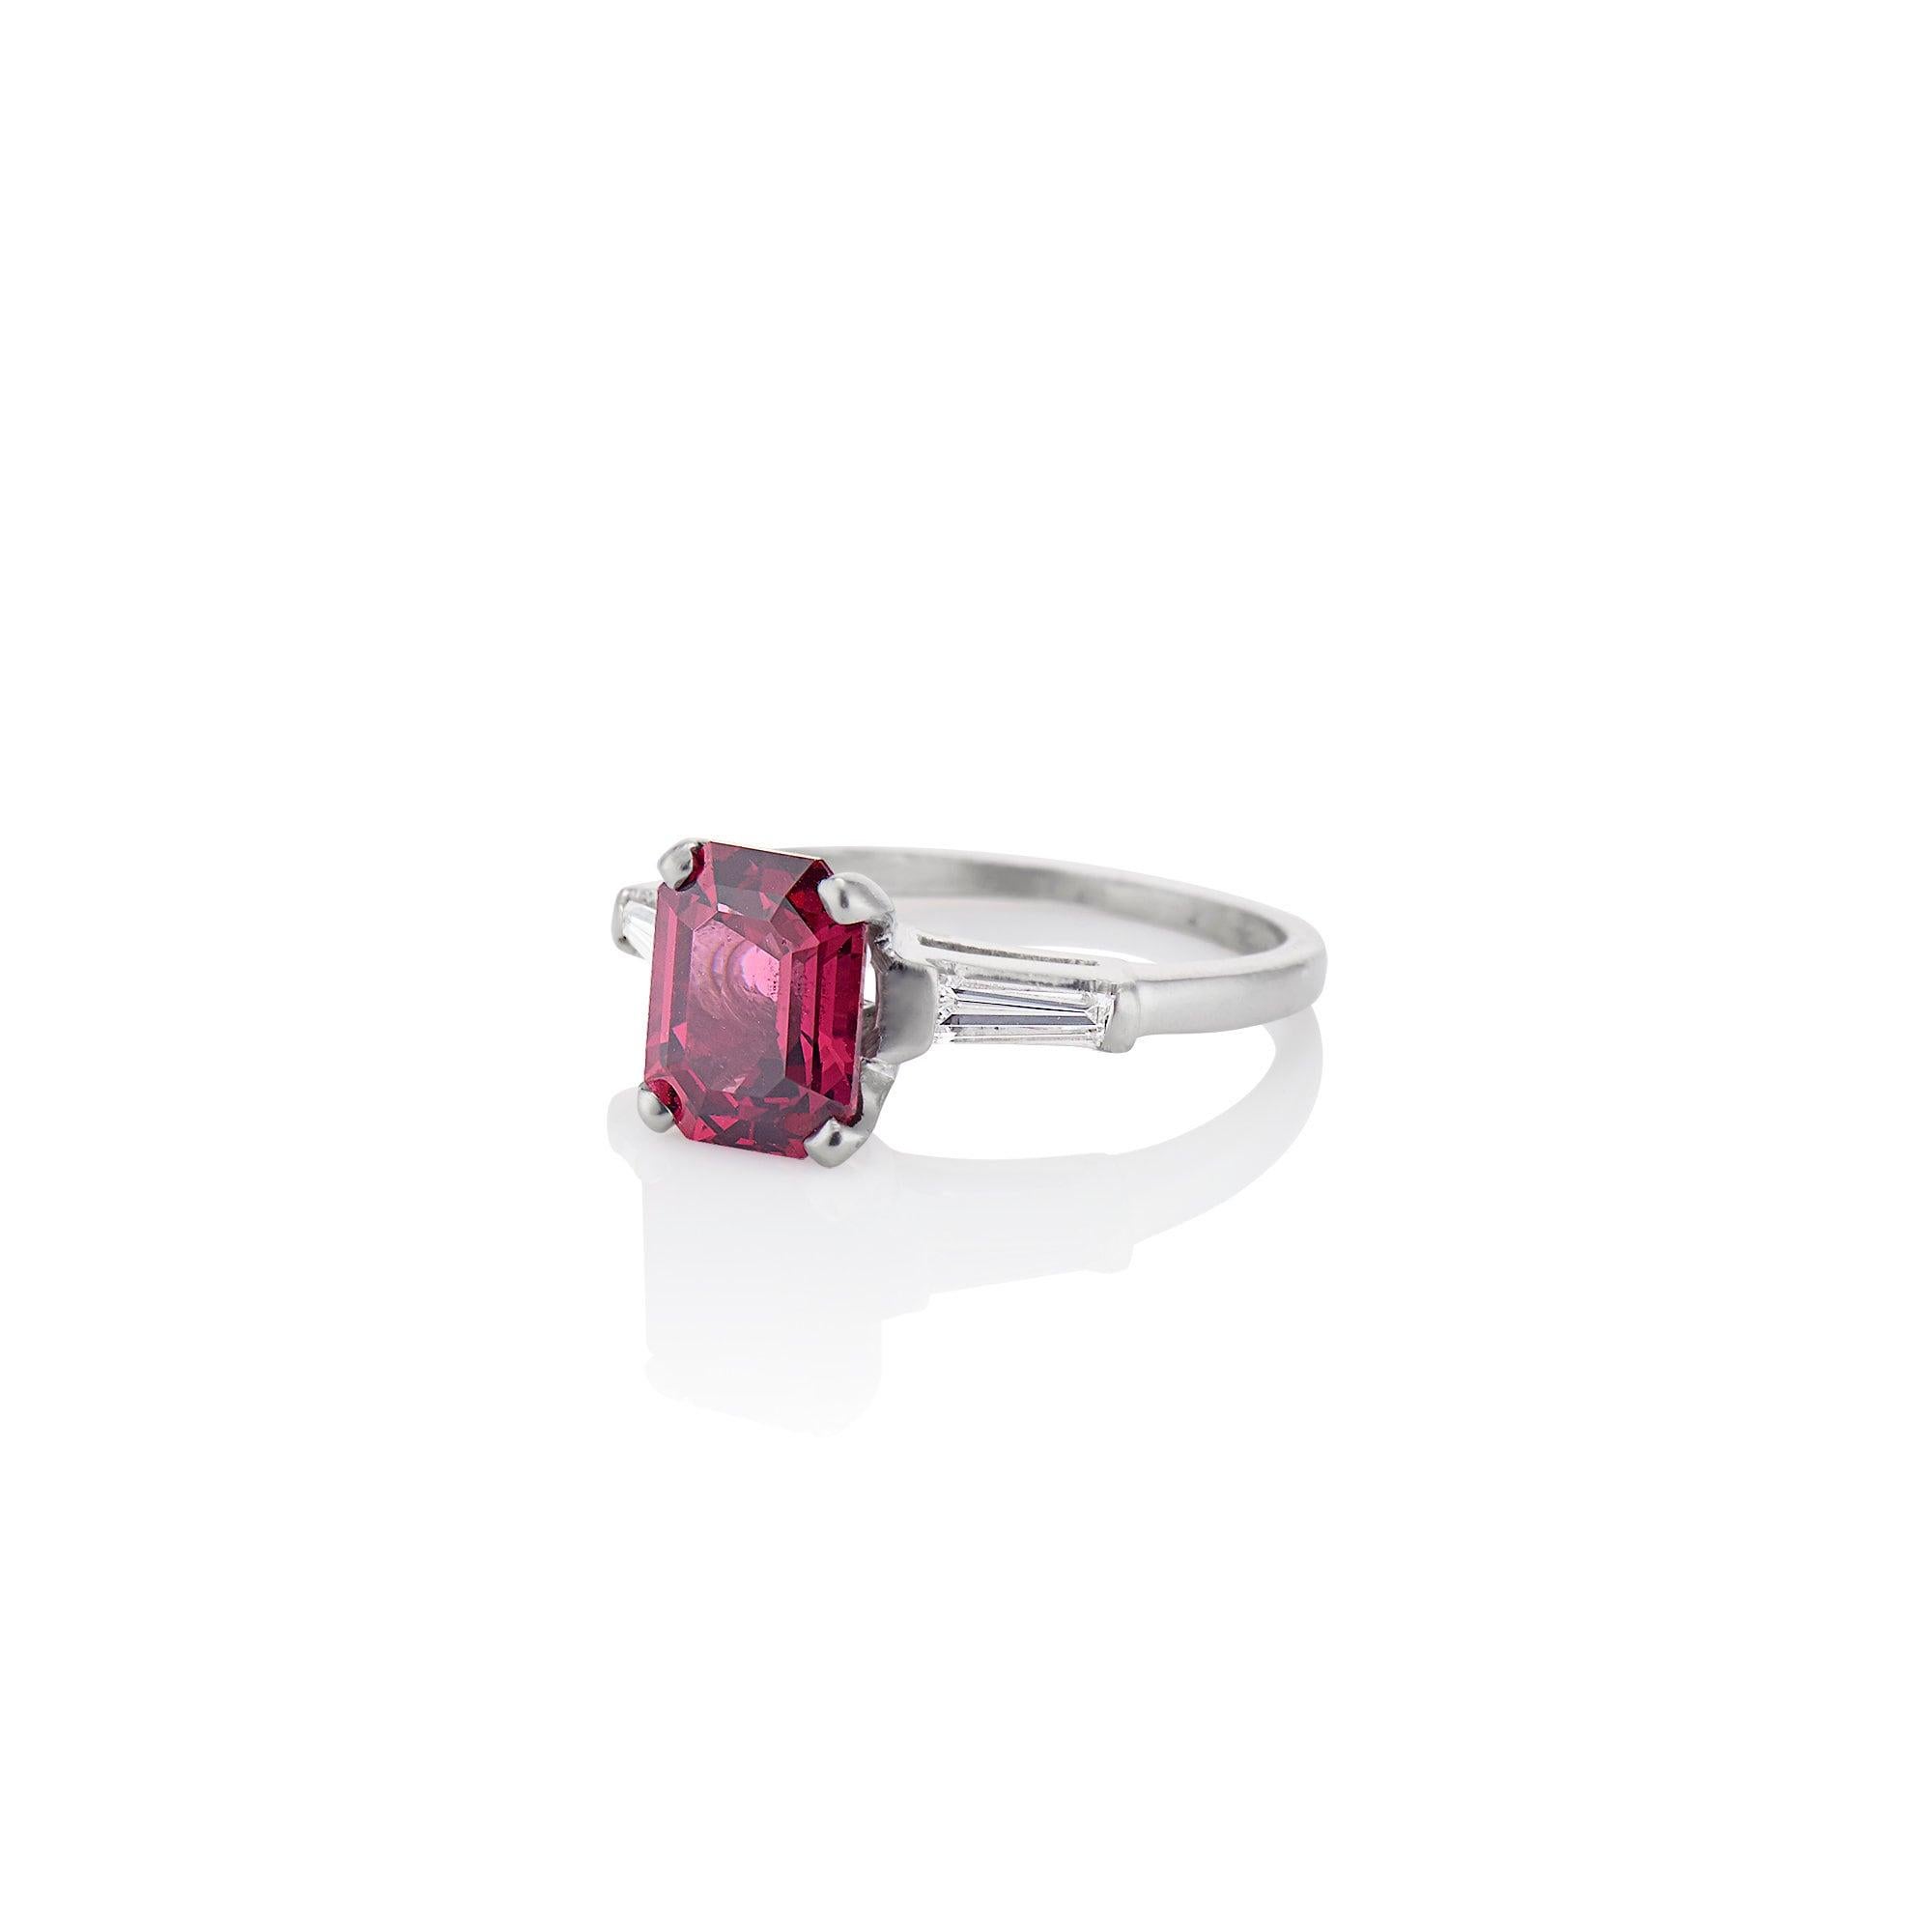 Vintage Platinum Rubellite Tourmaline & Diamond Ring Set In Good Condition For Sale In Hummelstown, PA